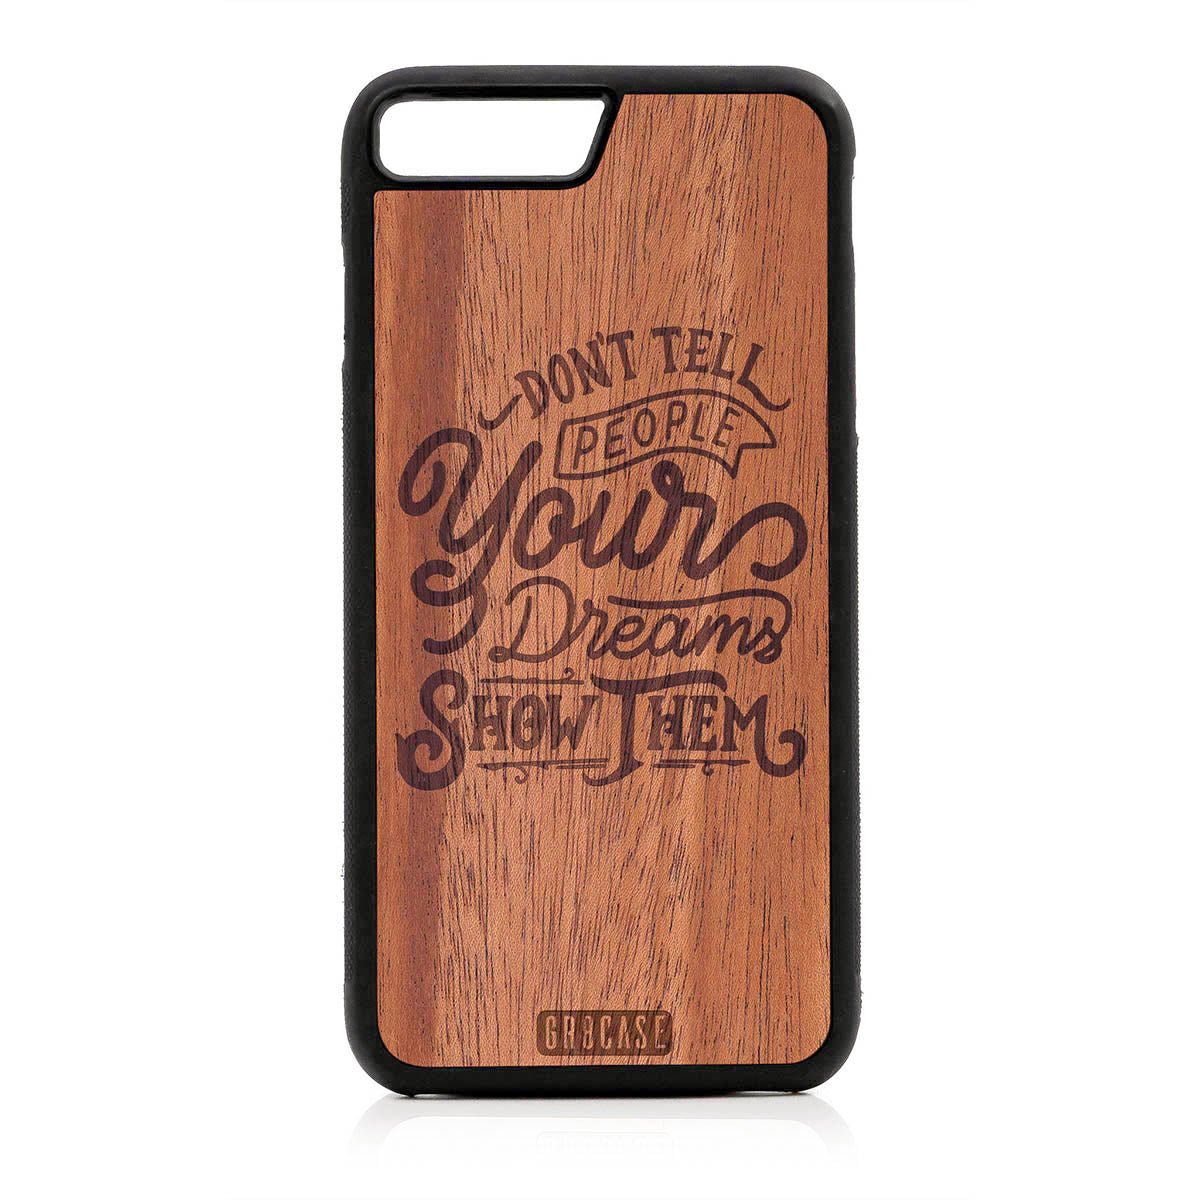 Don't Tell People Your Dreams Show Them Design Wood Case For iPhone 7 Plus / 8 Plus by GR8CASE